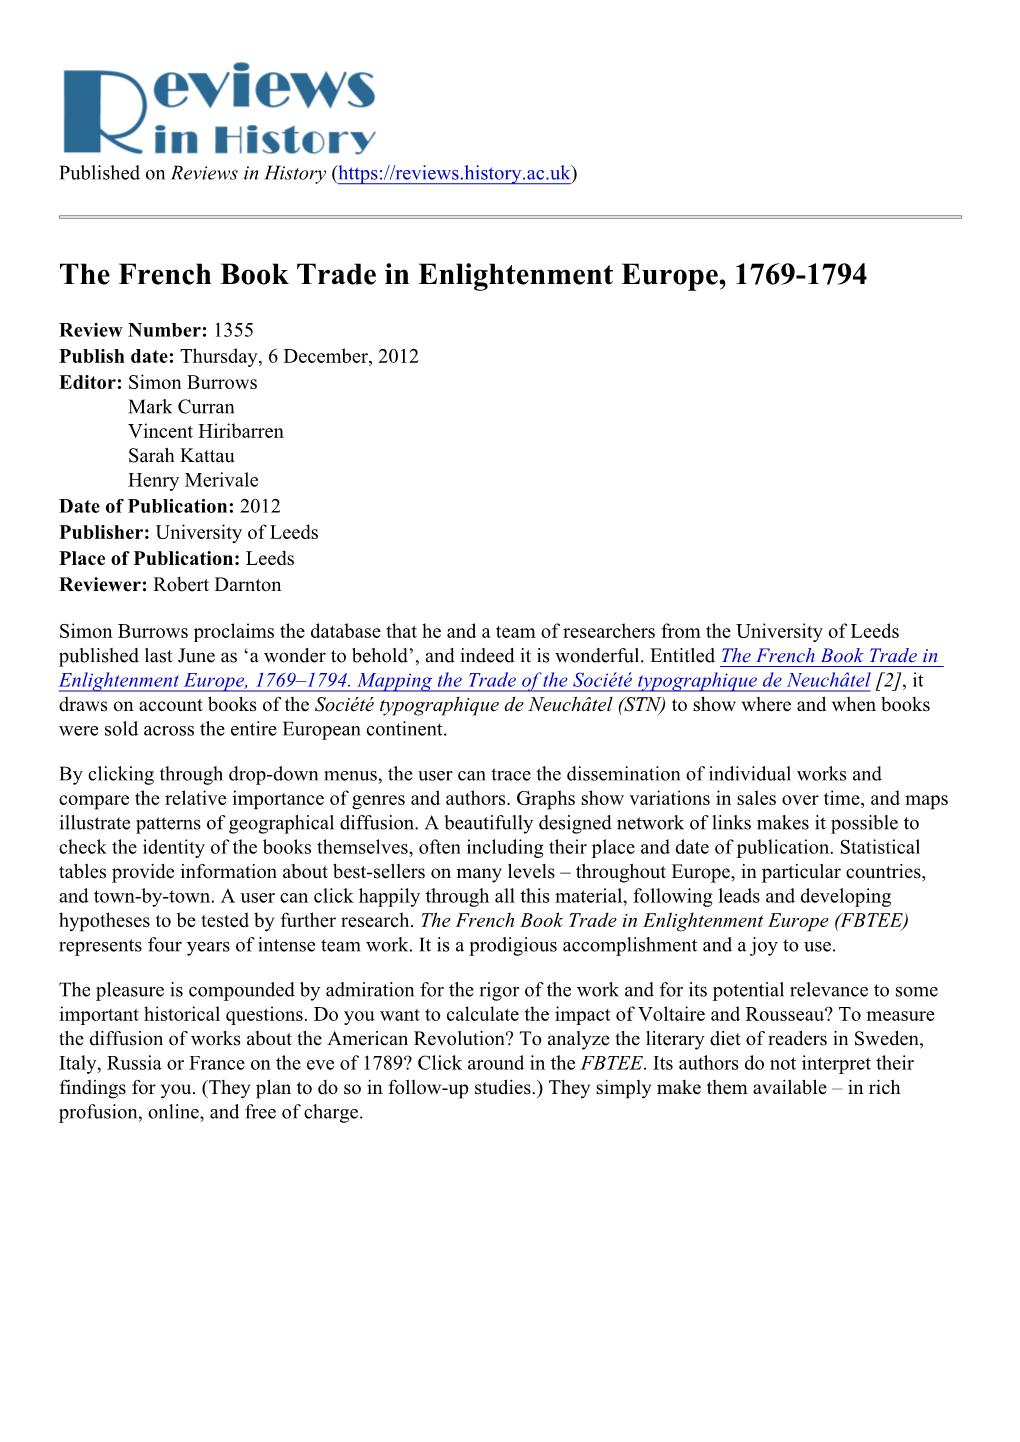 The French Book Trade in Enlightenment Europe, 1769-1794